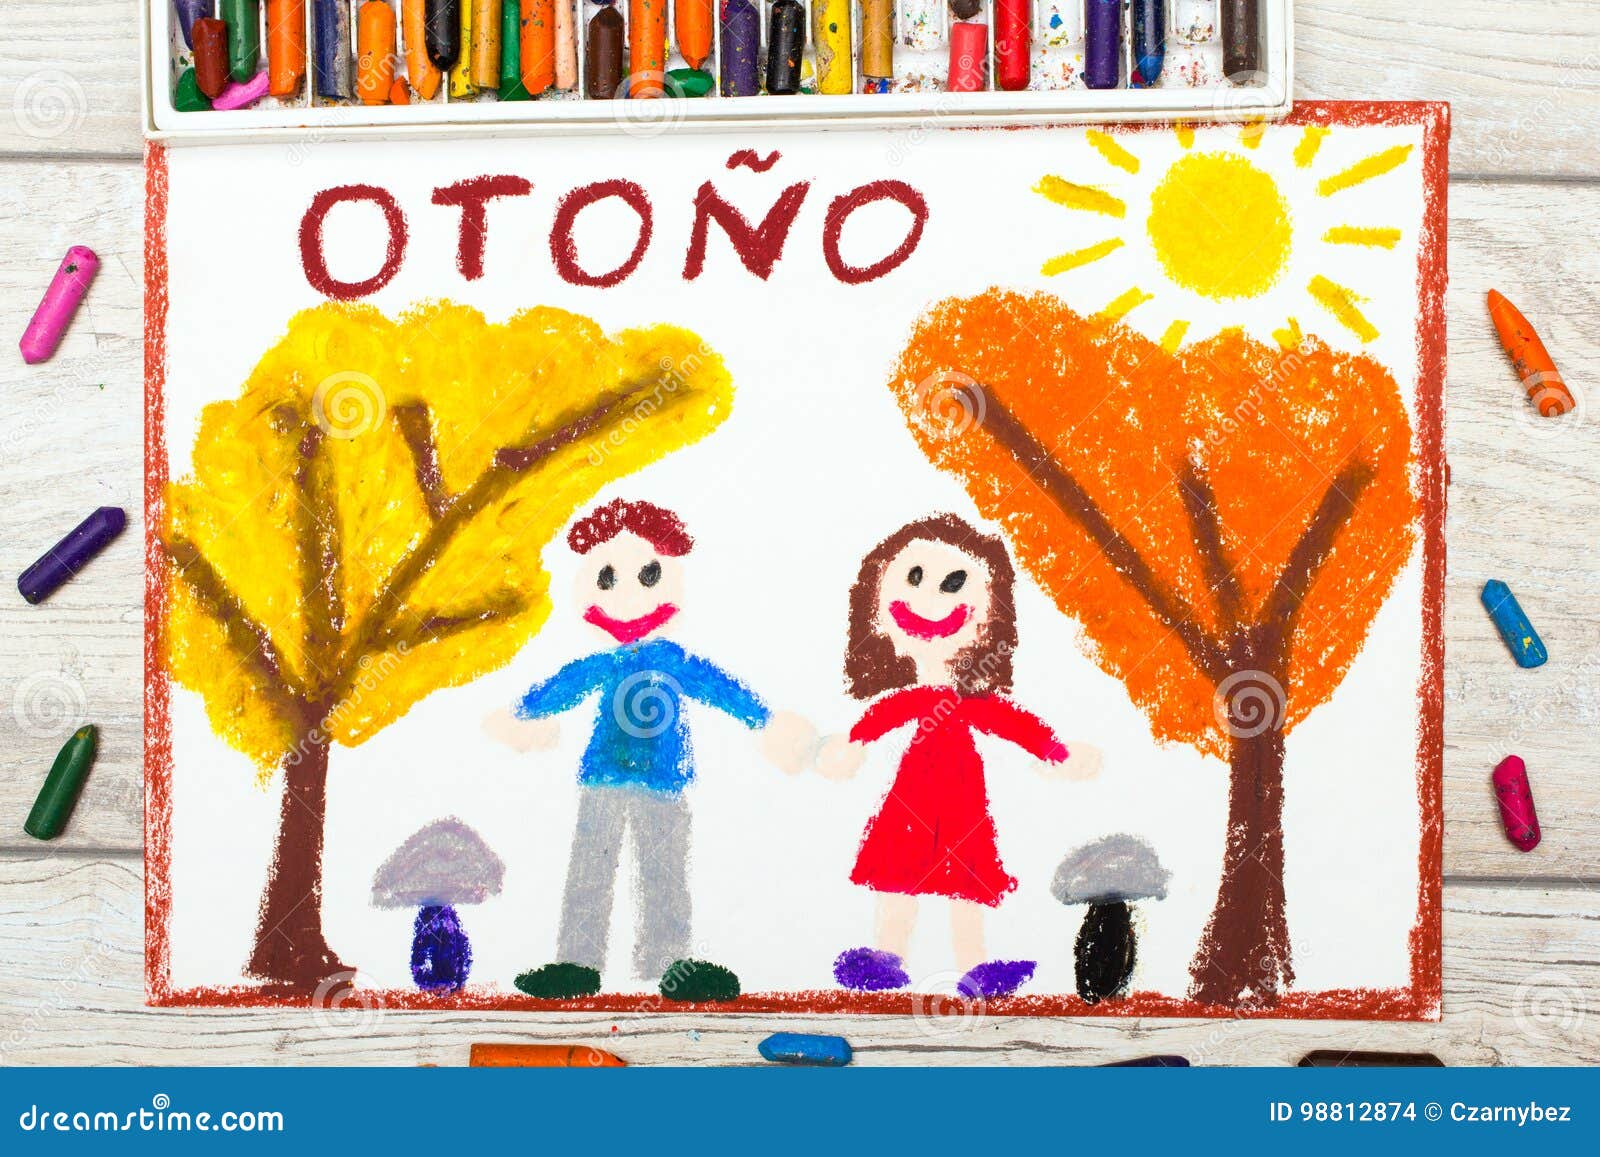 drawing: spanish word autumn, smiling couple and trees